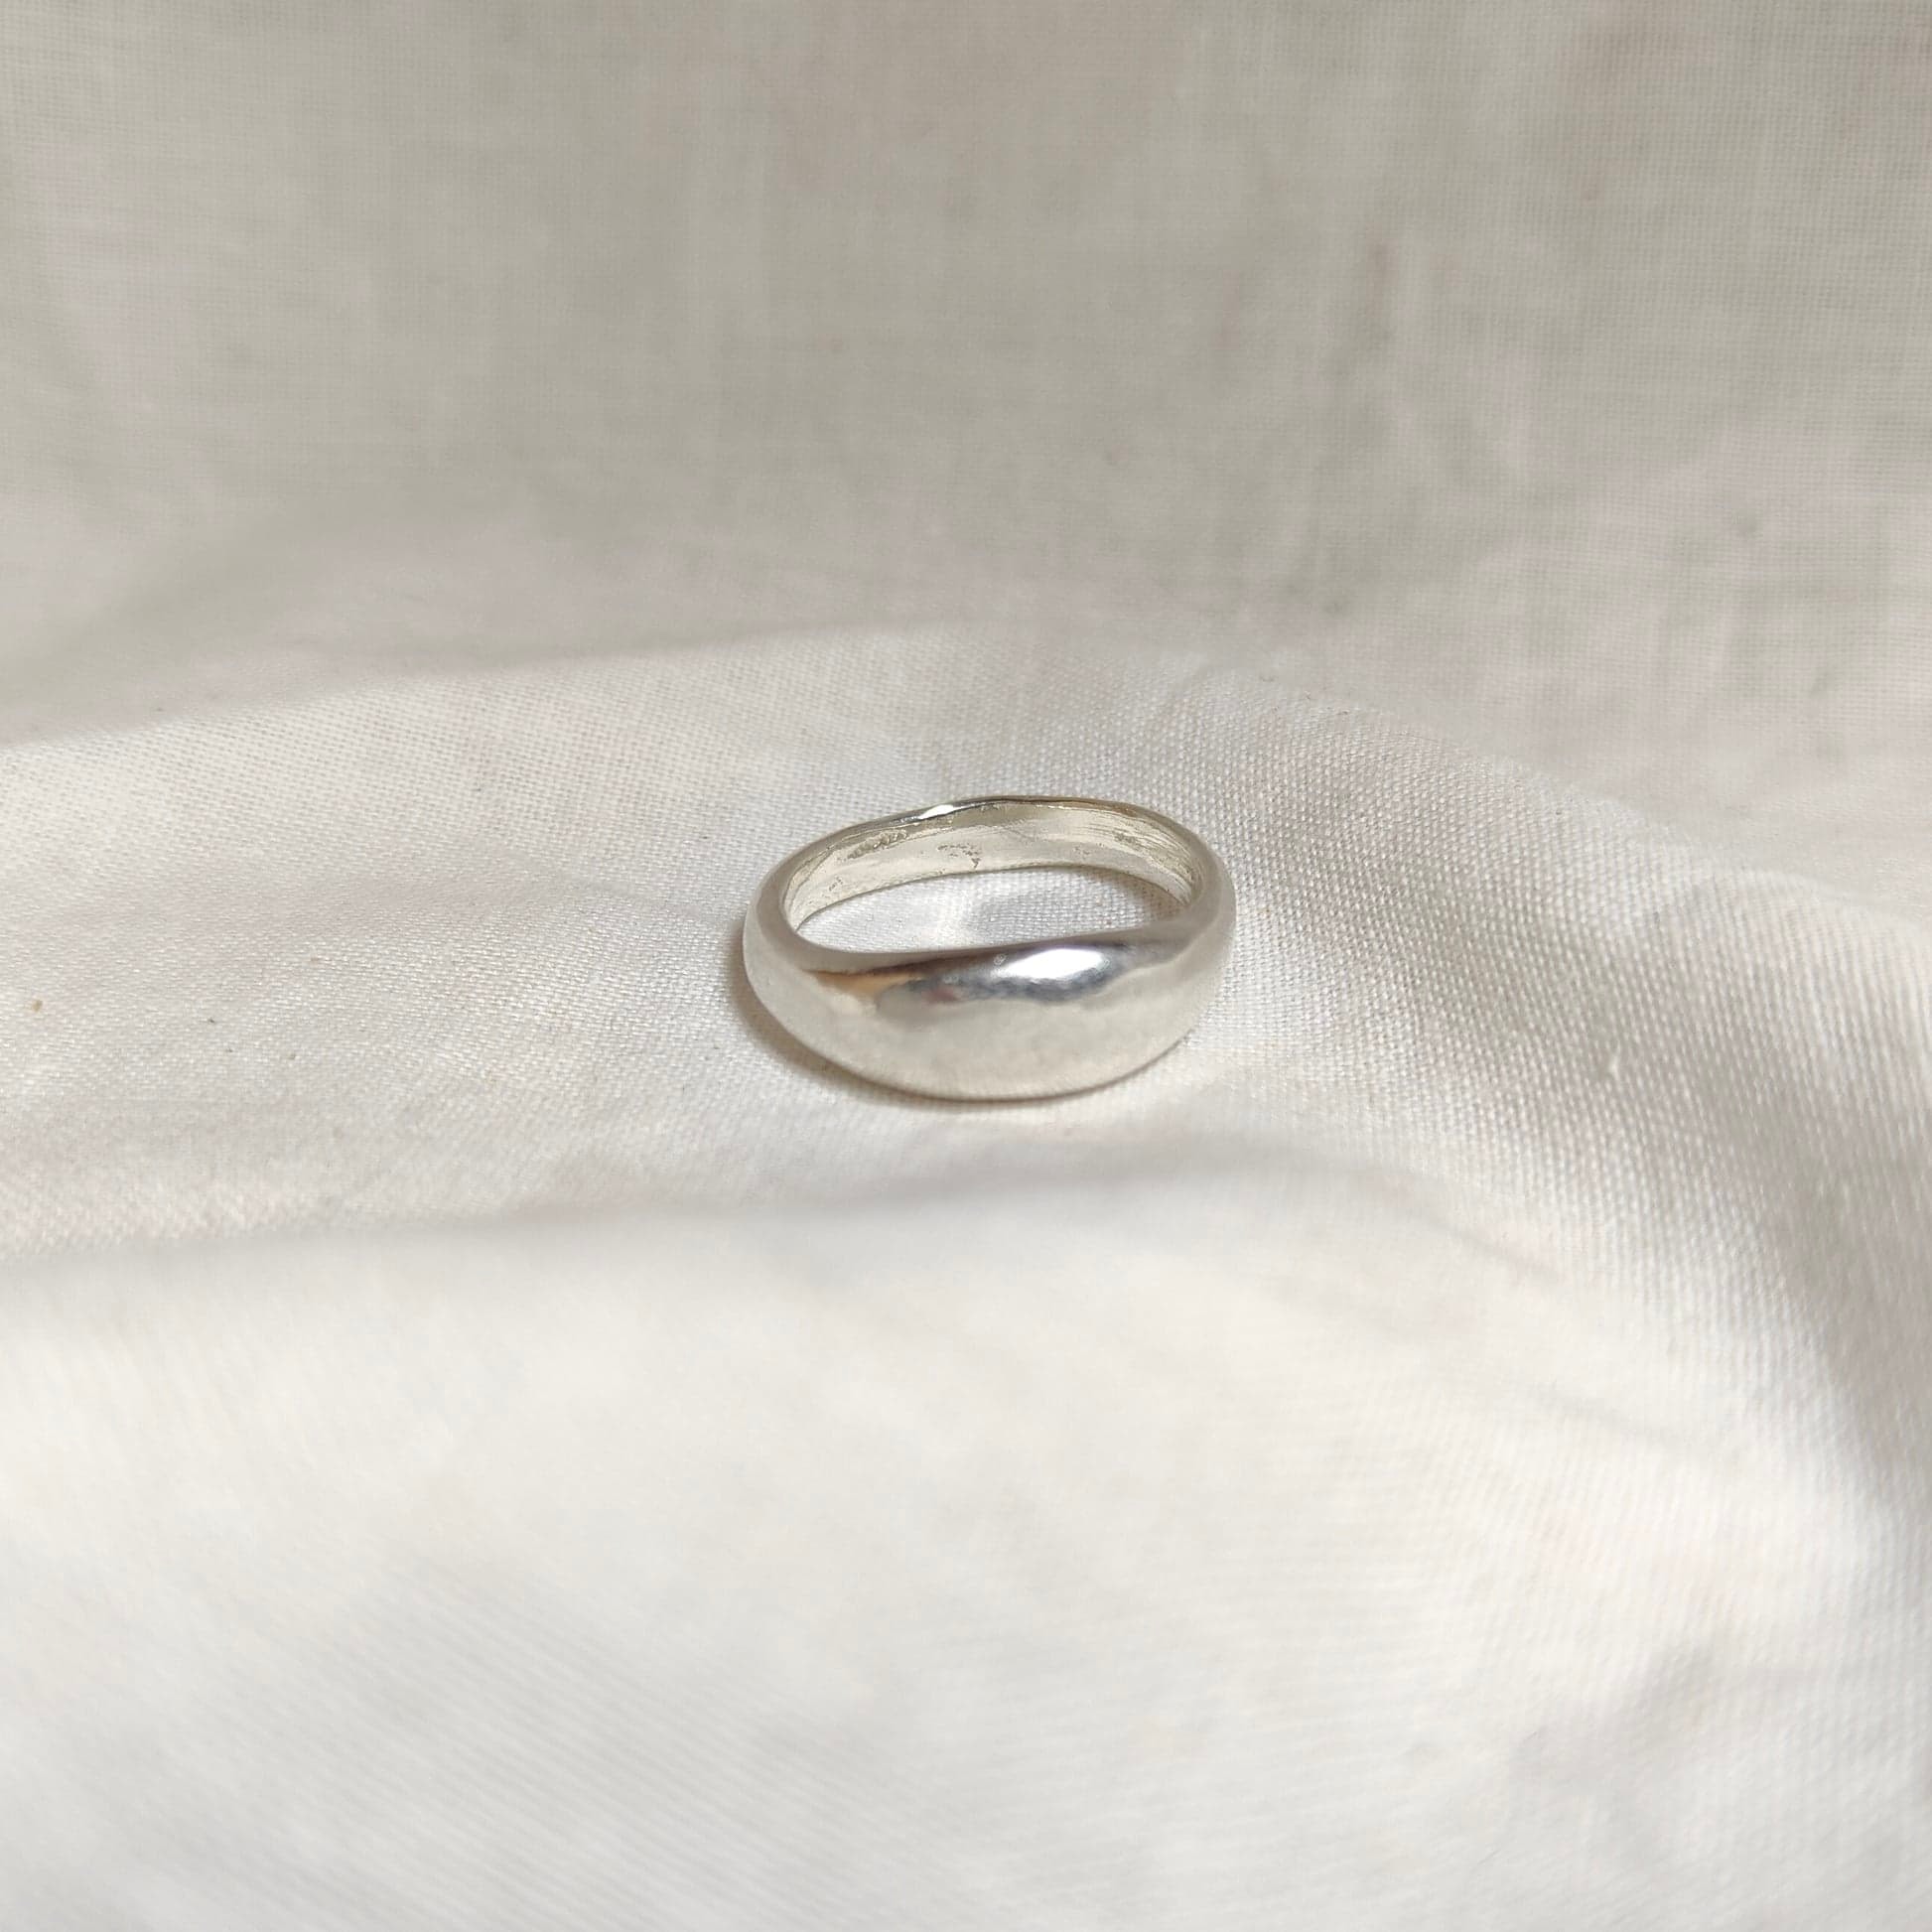 Small Domed Ring